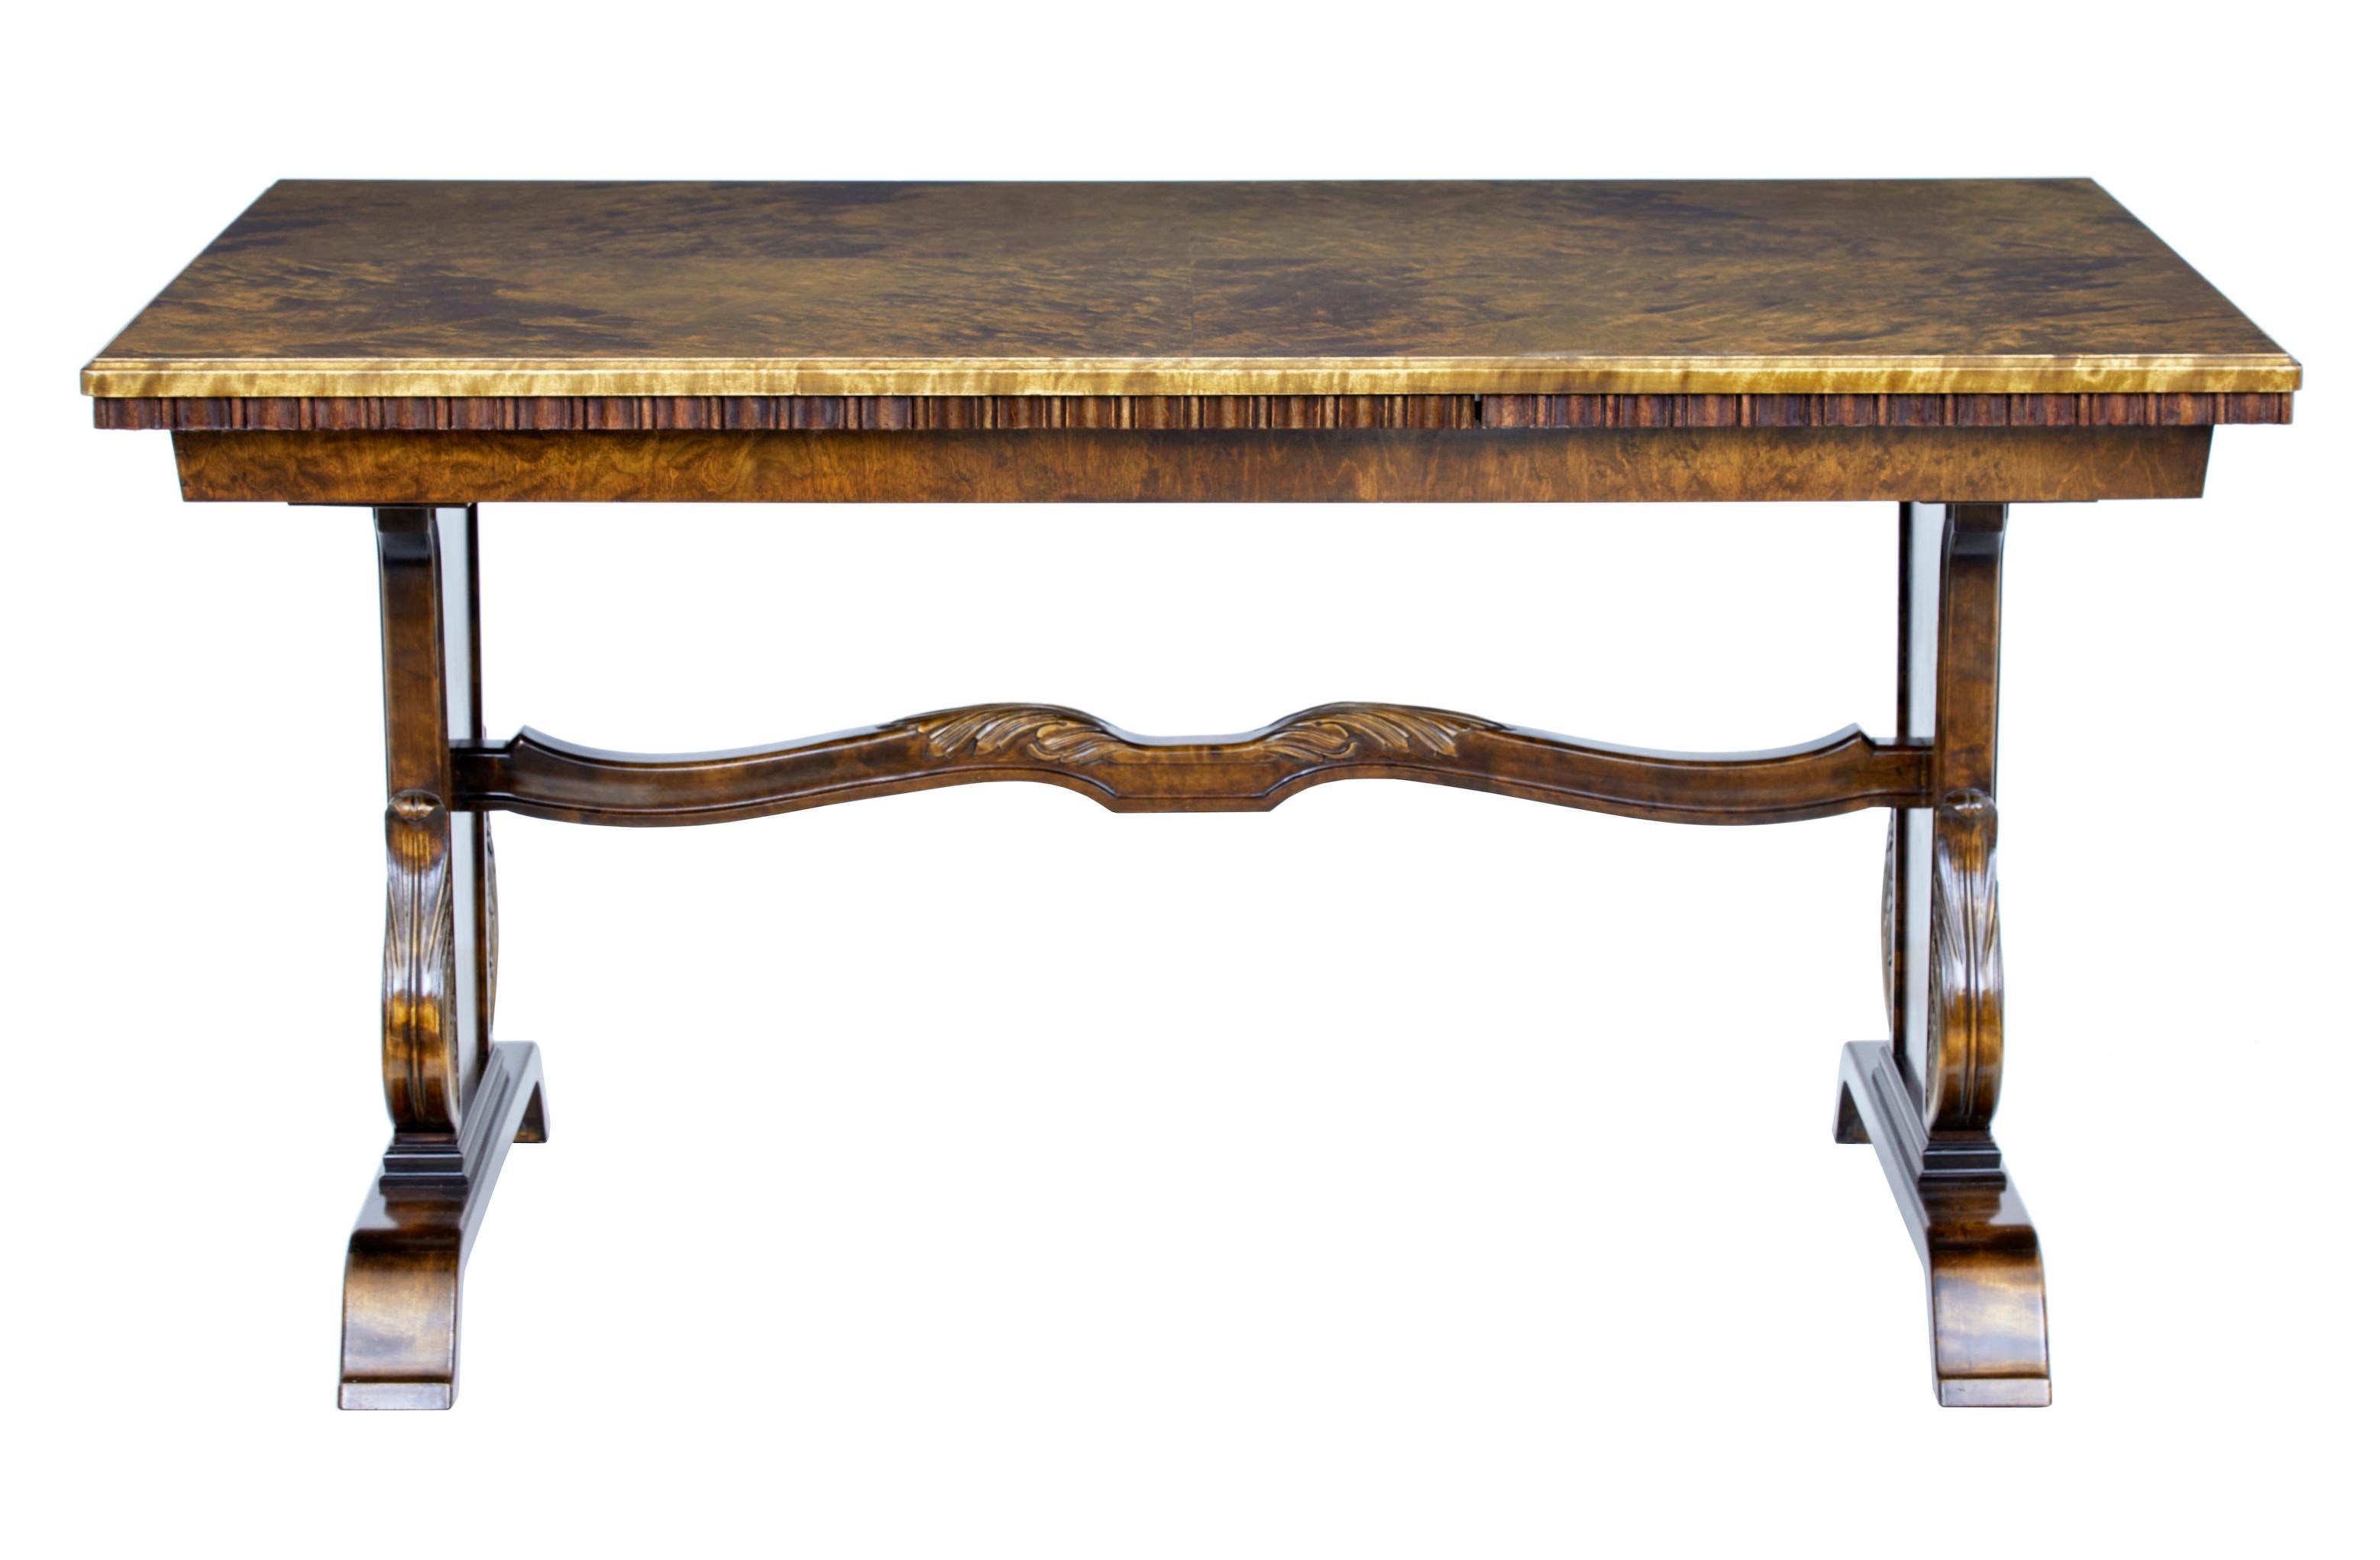 Fine quality late Art Deco carved birch dining table, circa 1940.

Made by Swedish company Bodafors SMF.

Quarter veneered burr birch top surface with a draw leaf on each end, allowing it to seat up to 10 people. Standing on a tapering base with